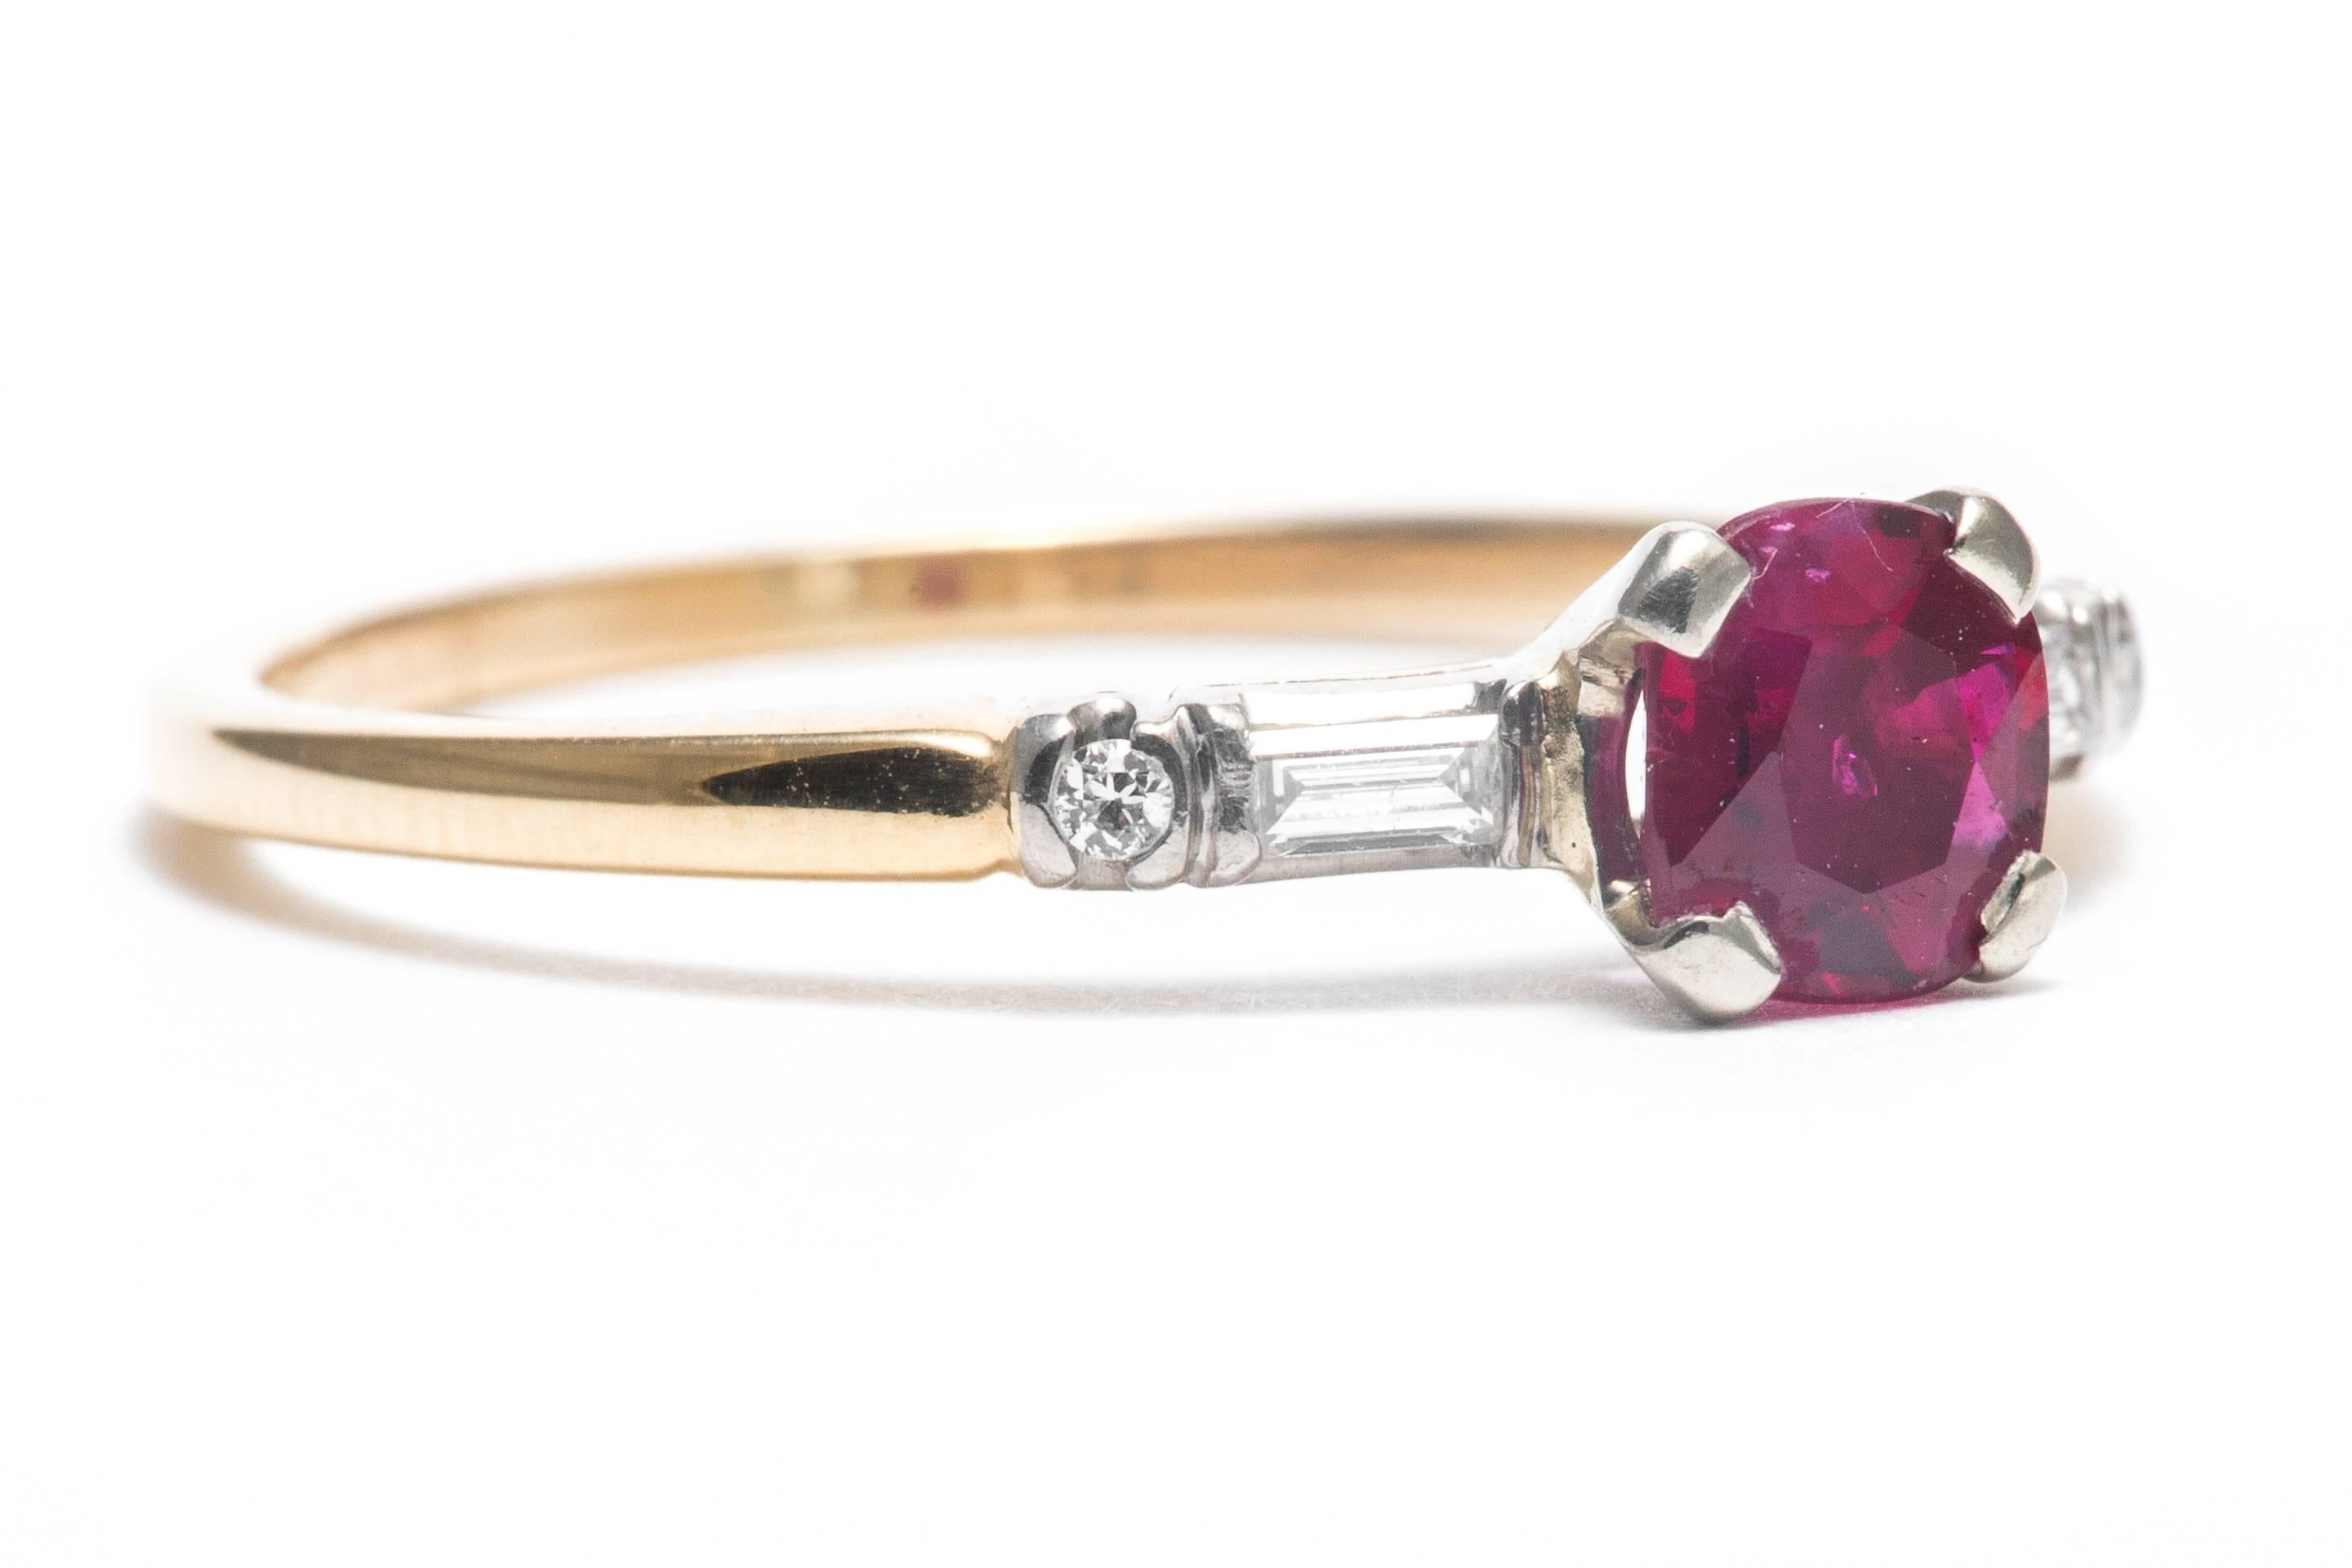 Beacon Hill Jewelers Presents:

A vintage mid 20th century ruby, and diamond ring in platinum and 14 karat yellow gold.  Centered by a high quality rich vivid red colored ruby, this ring also features a pair of beautiful baguette and Swiss cut